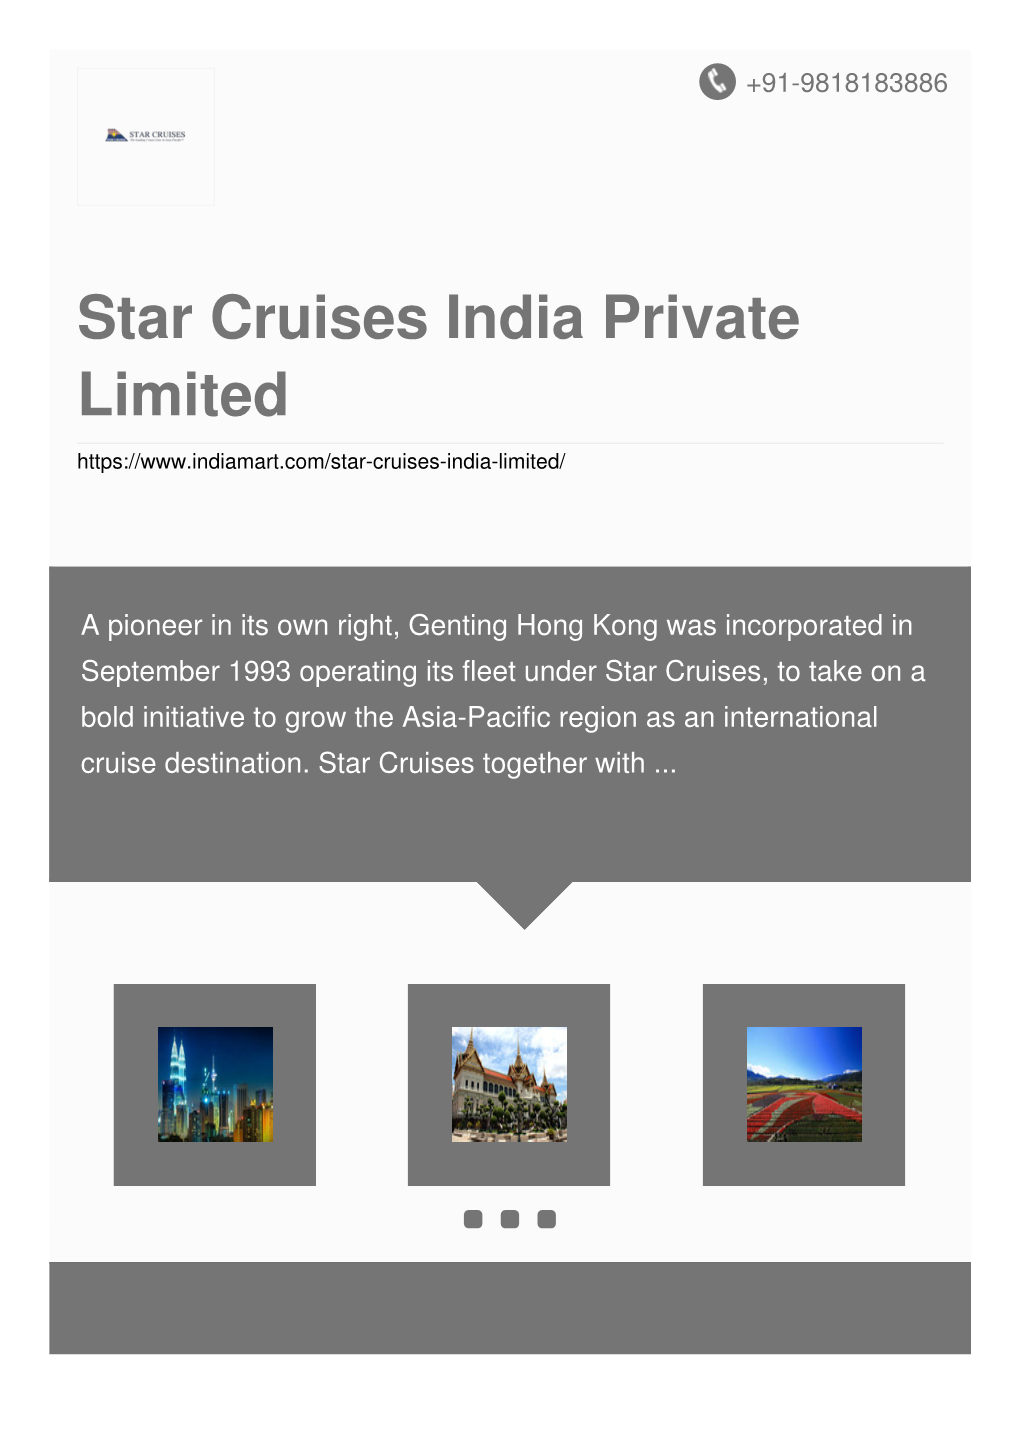 Star Cruises India Private Limited